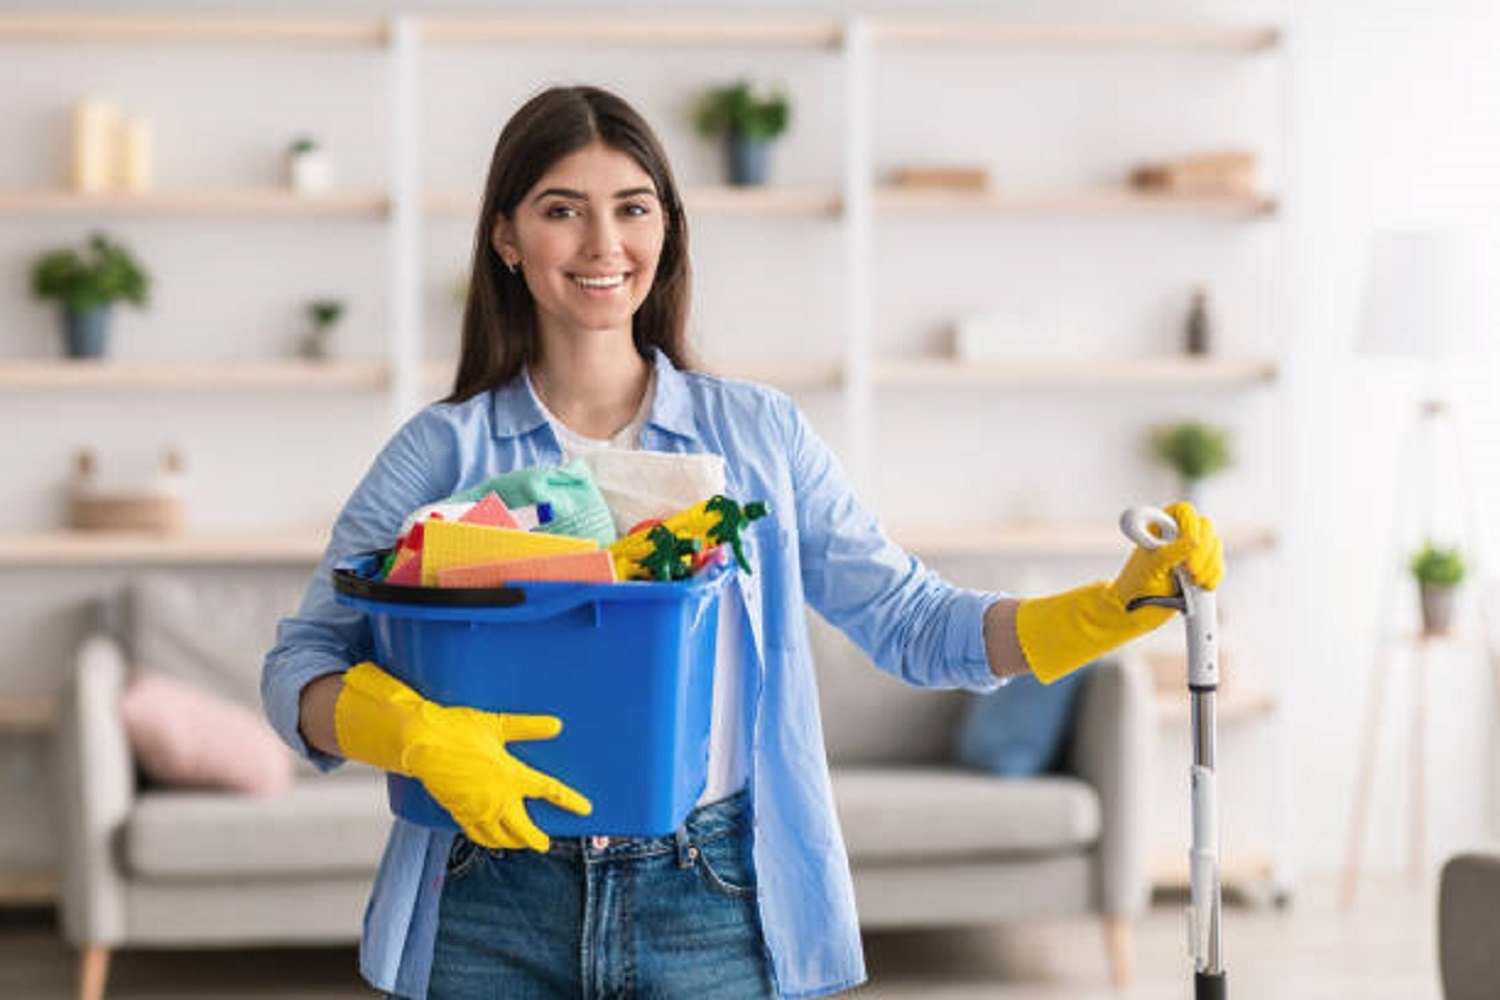 Professional Maid Services Near You in Costa Mesa, CA, You’ve Got It Maid